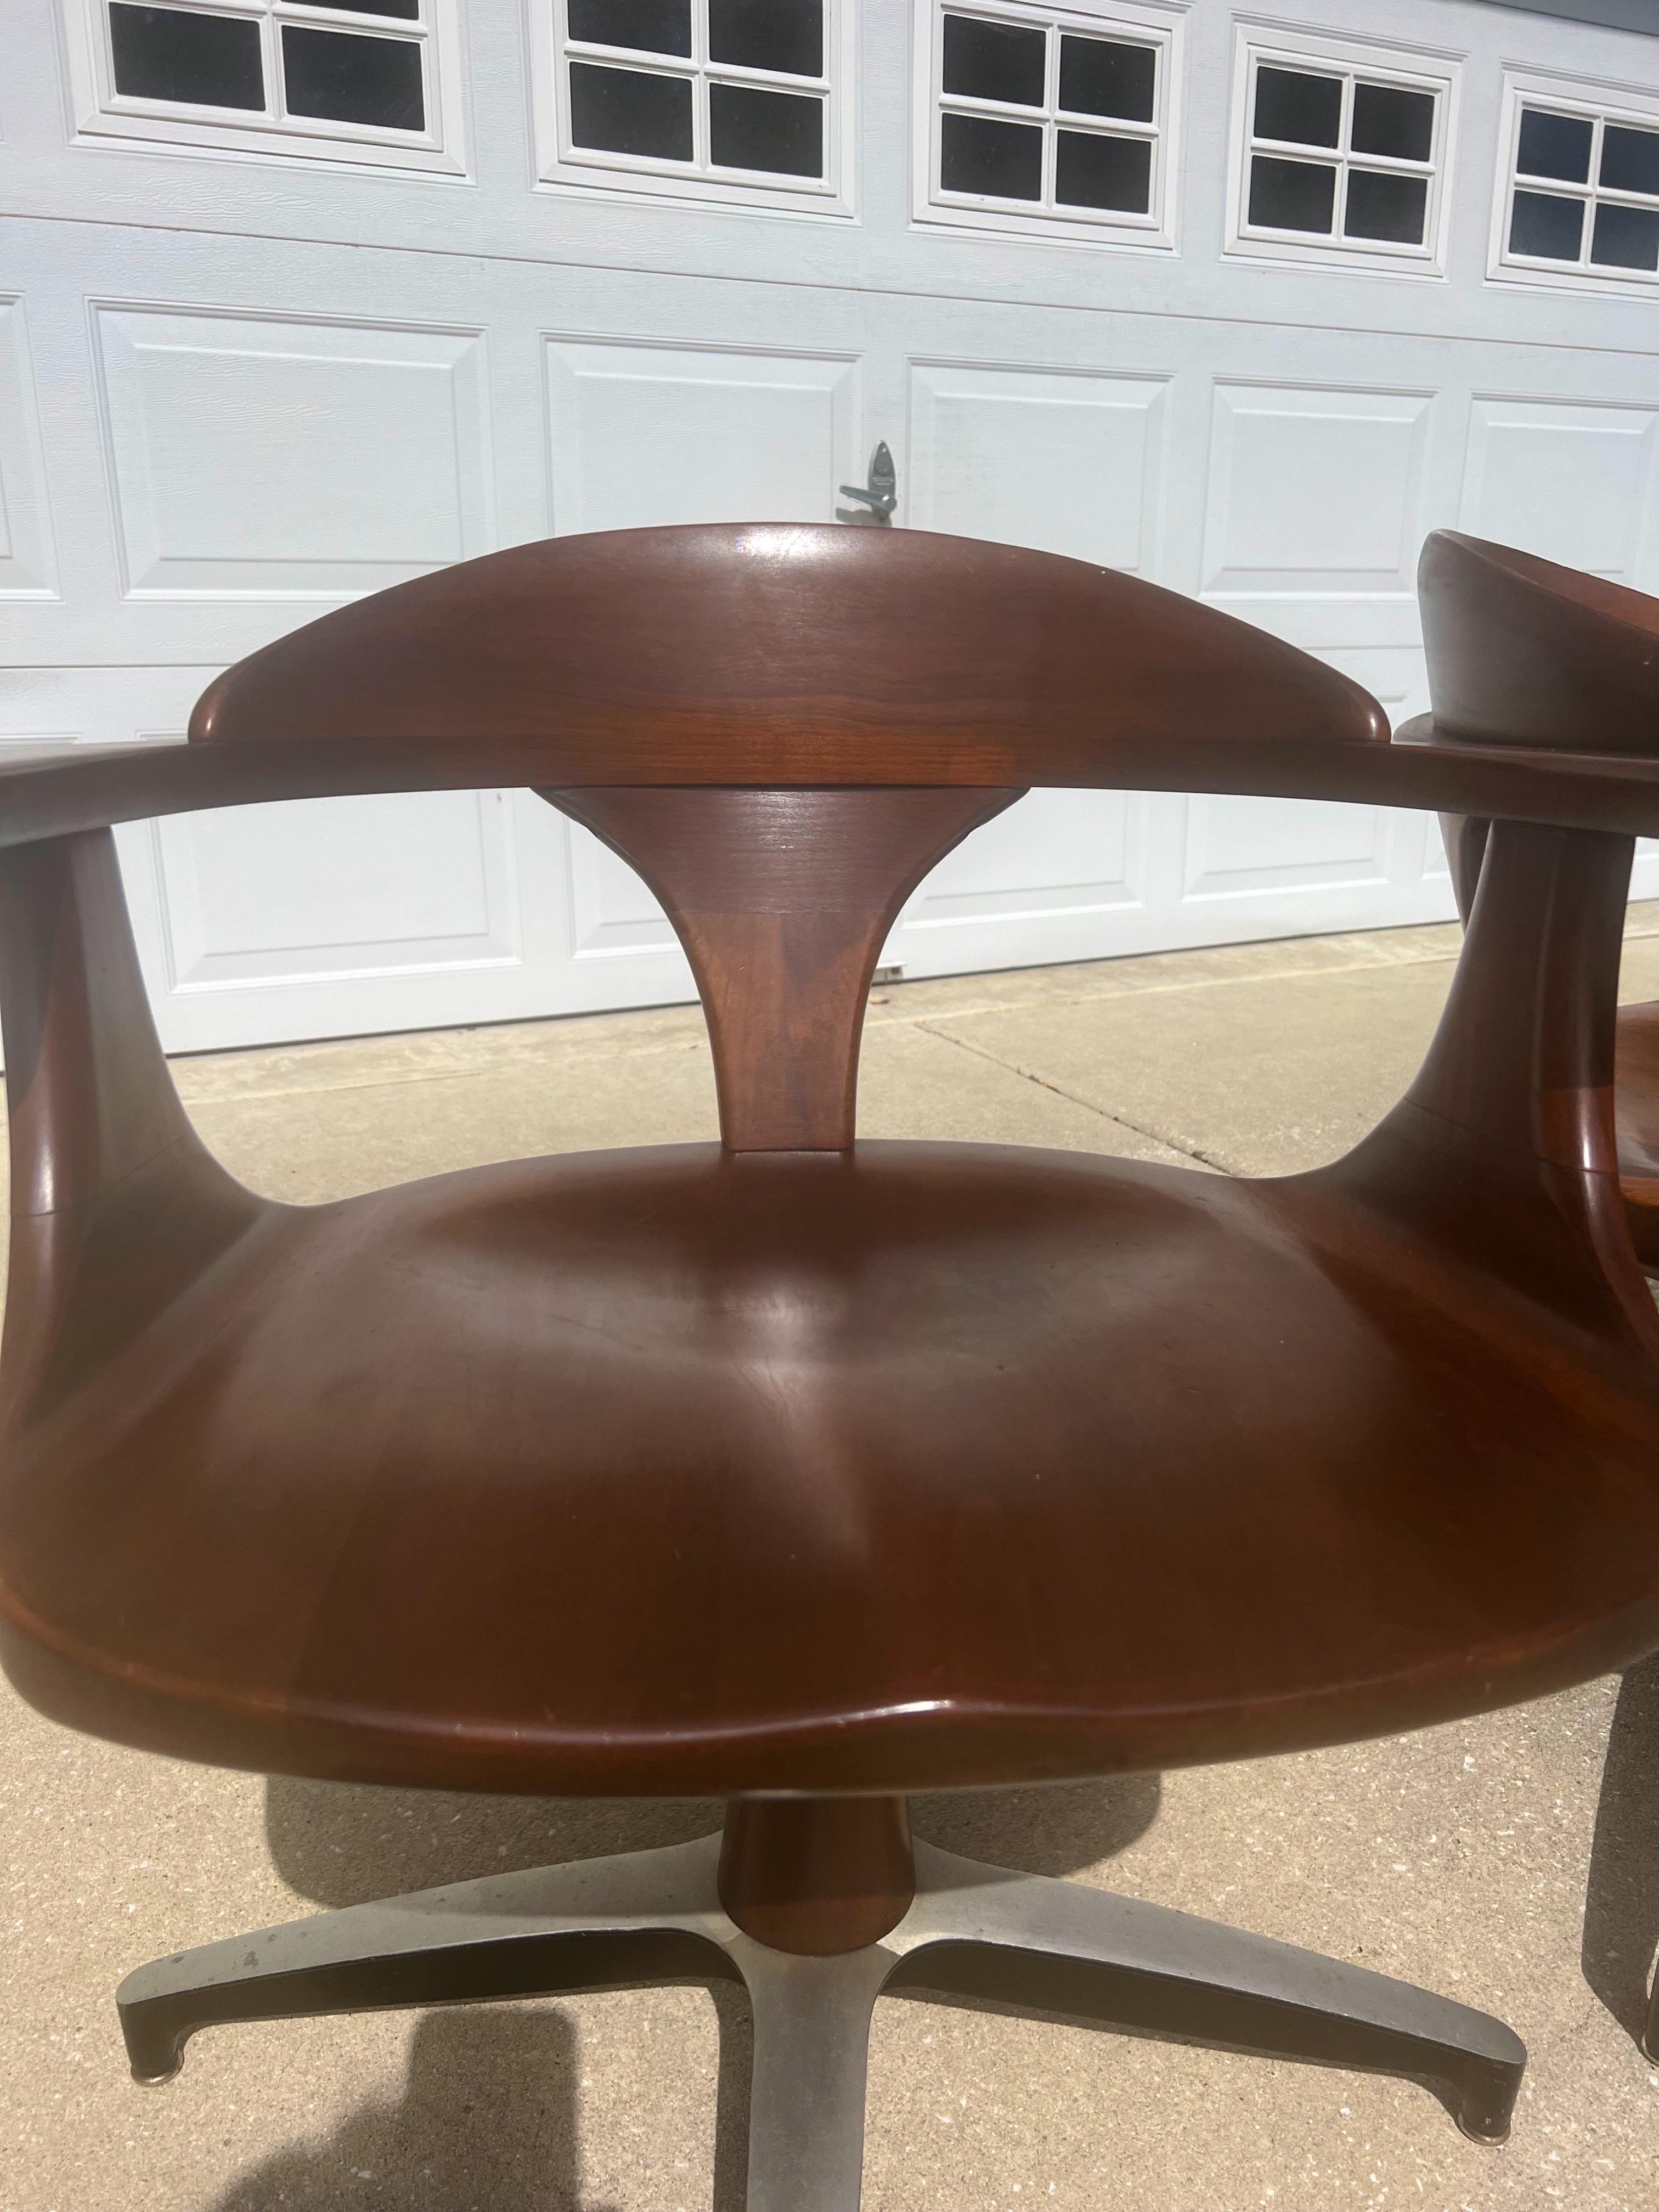 Steel 1960s Heywood Wakefield “Cliff House” Dining Table and Chairs, a Set of 5 For Sale